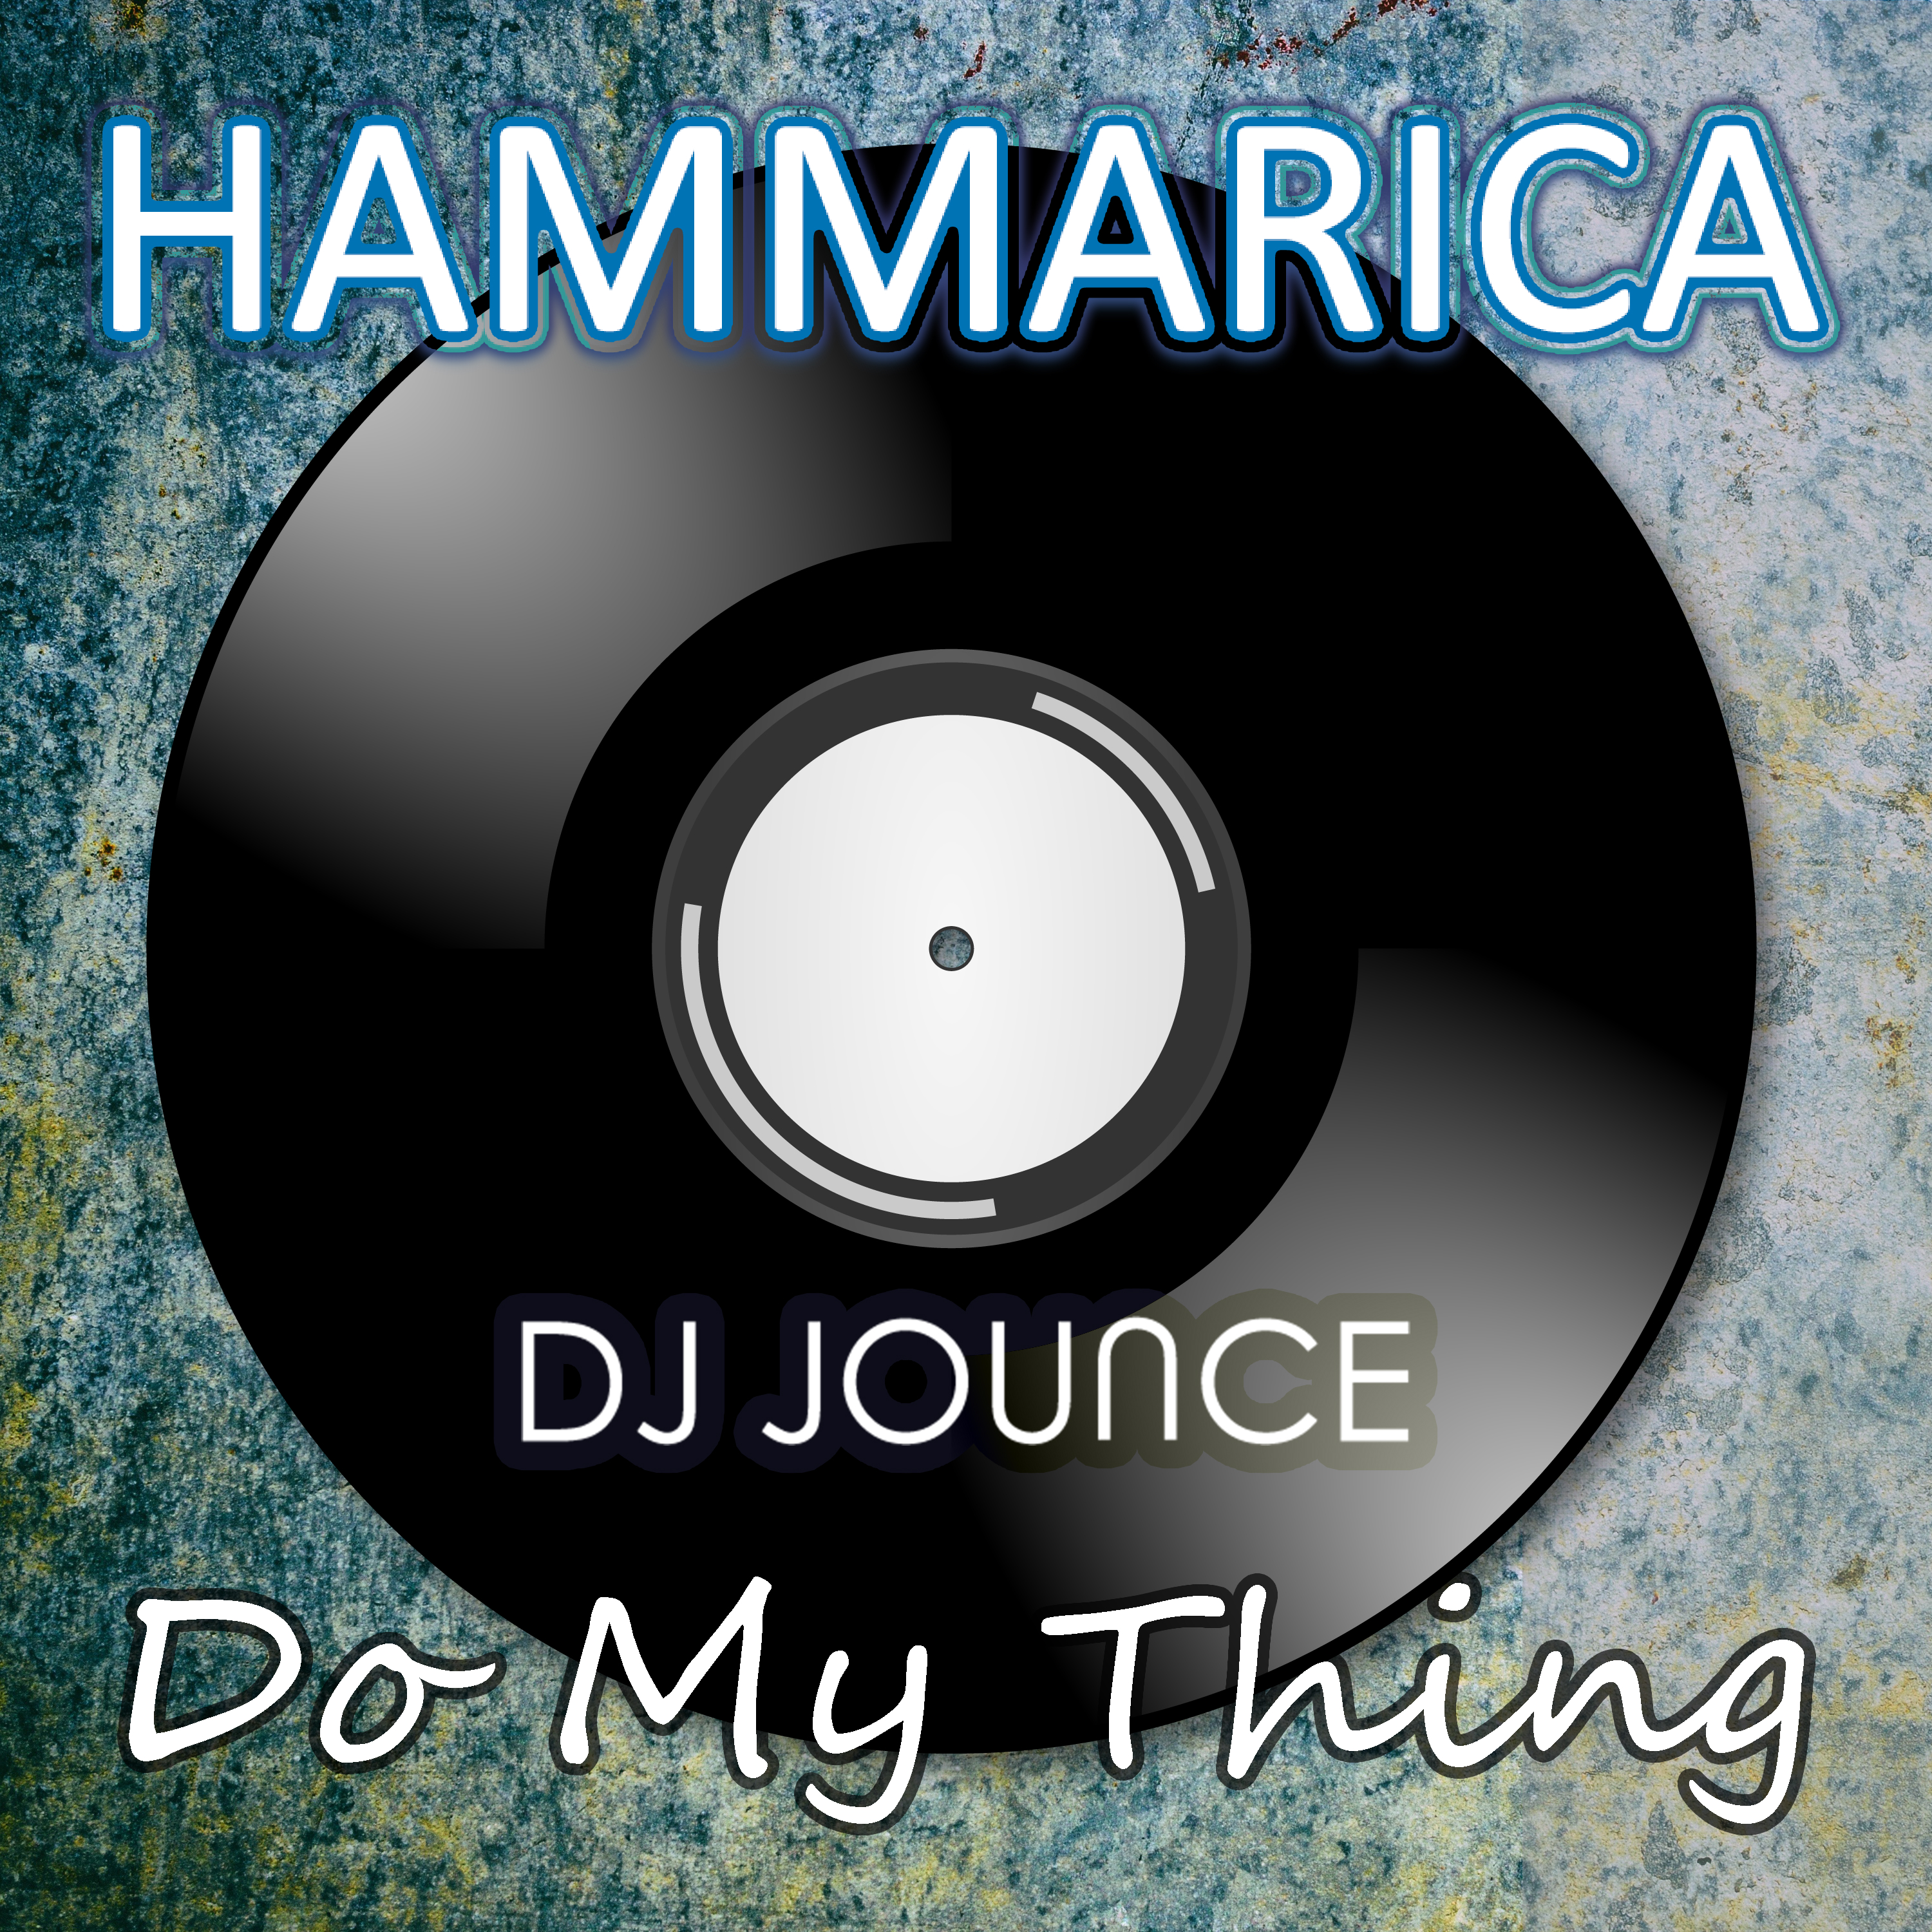 DJ JOUNCE – DO MY THING | OUT NOW ON HAMMARICA!